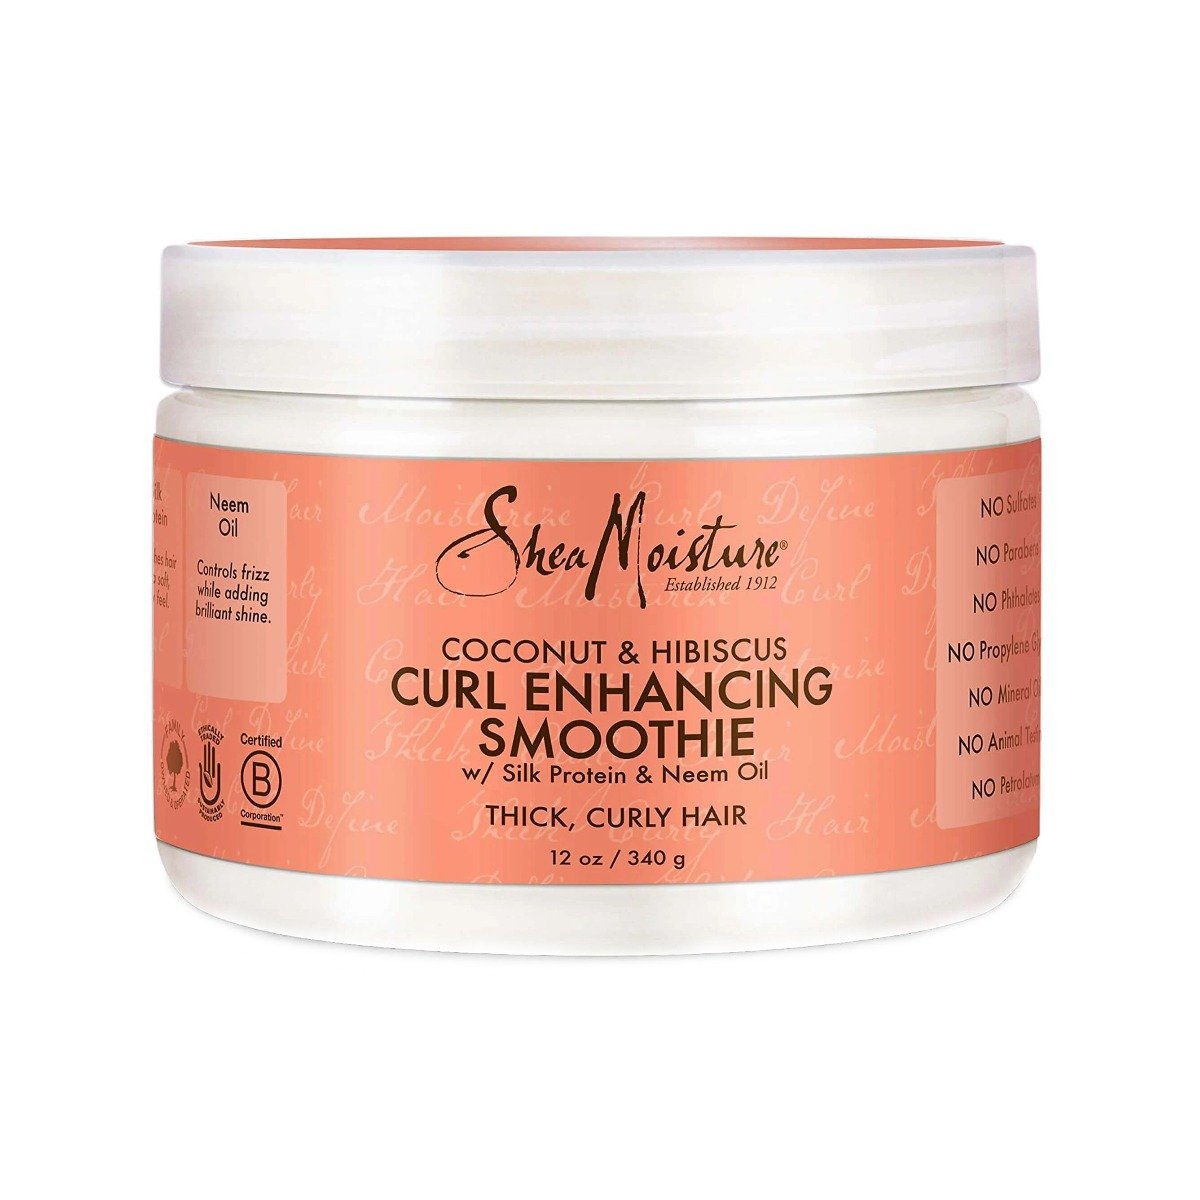 Shea Moisture Coconut & Hibiscus Curl Enhancing Smoothie Styling Cream - 340gm - Bloom Pharmacy